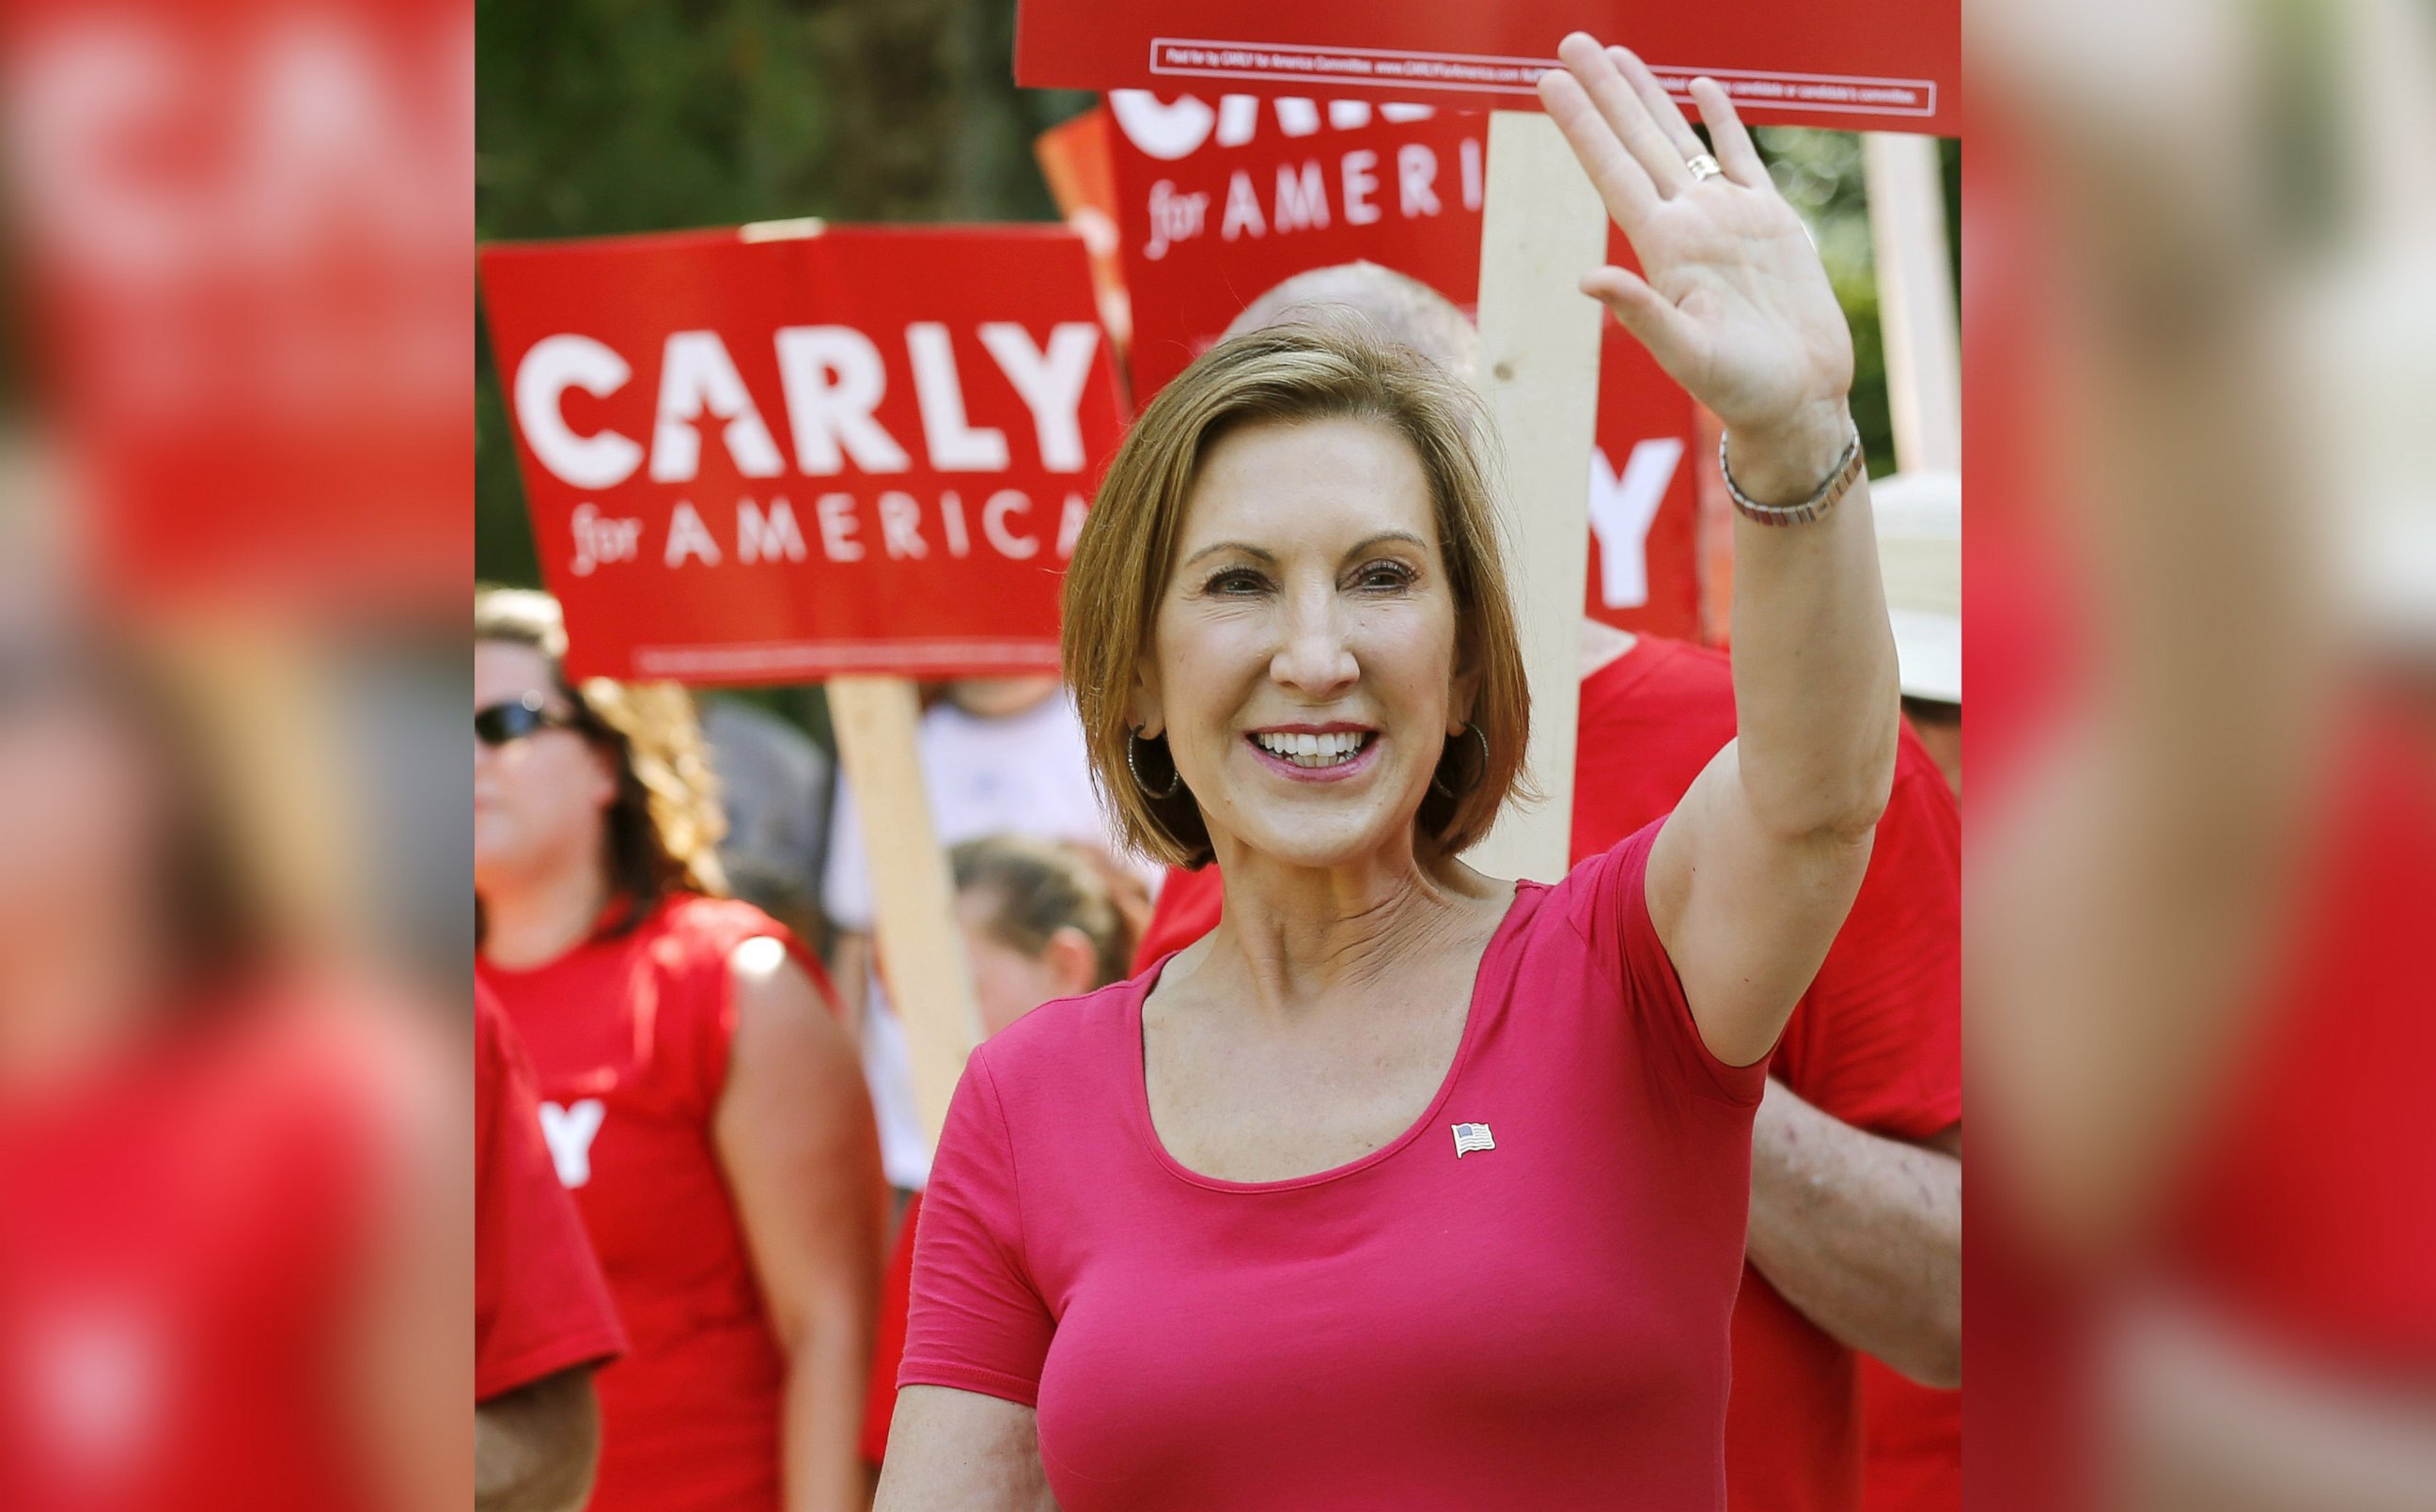 PHOTO: Republican presidential candidate Carly Fiorina, the former Hewlett-Packard chief executive, waves as she and supporters march in the Labor Day parade in Milford, N.H., Sept. 7, 2015.